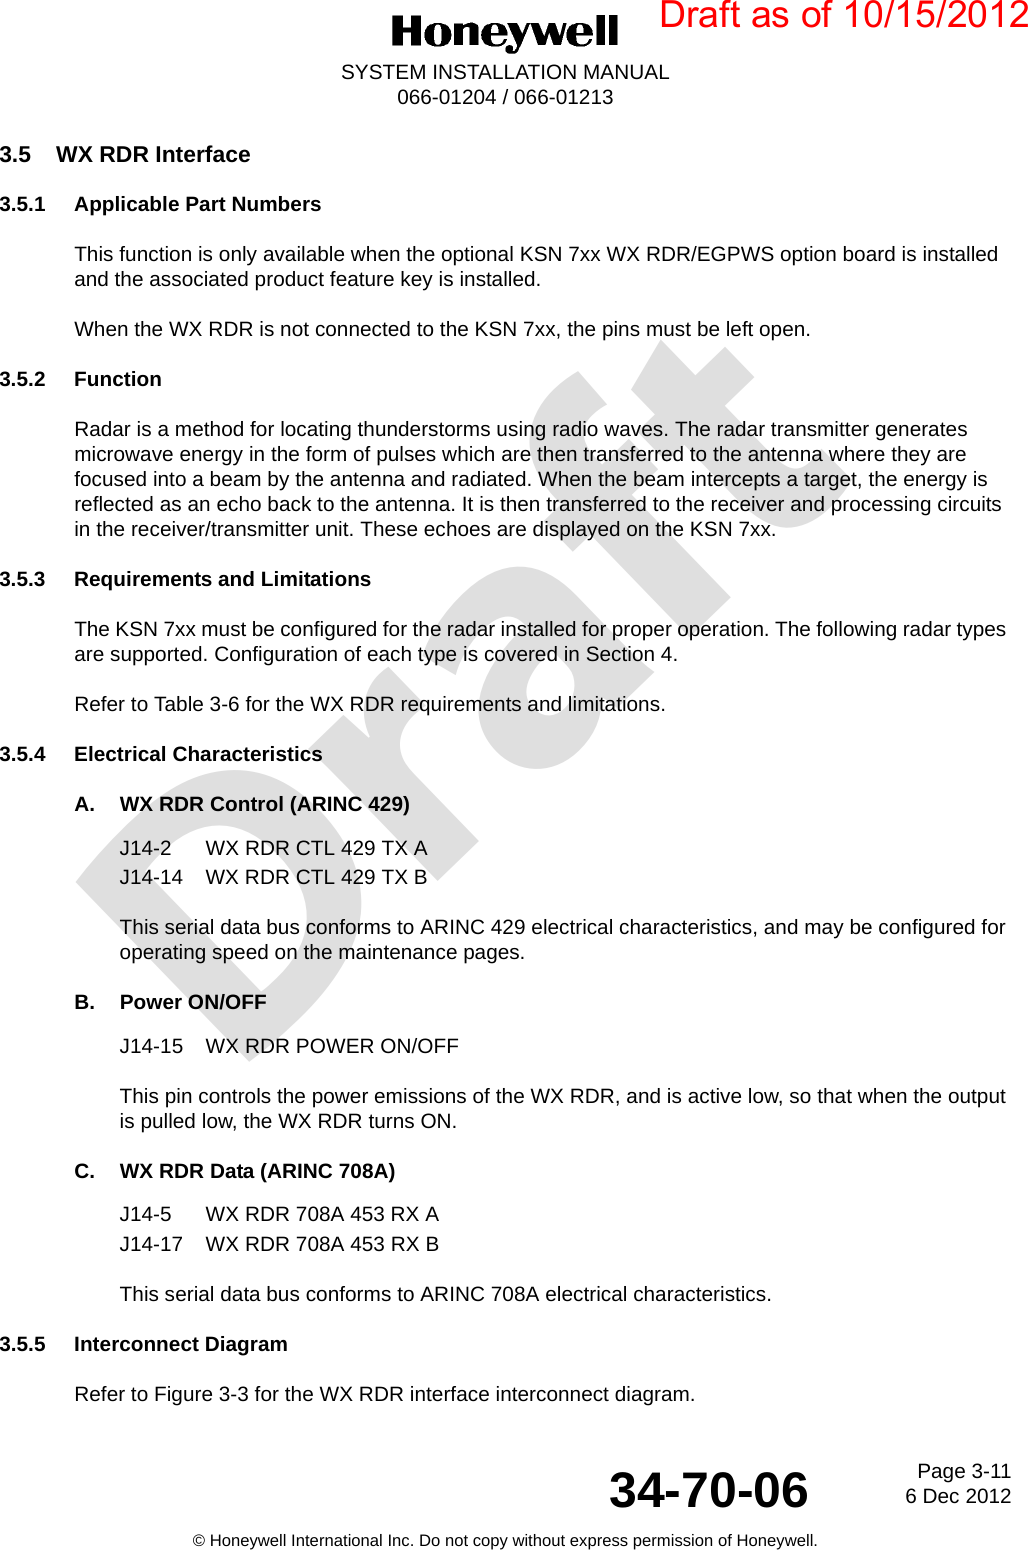 DraftPage 3-116 Dec 201234-70-06SYSTEM INSTALLATION MANUAL066-01204 / 066-01213© Honeywell International Inc. Do not copy without express permission of Honeywell.3.5 WX RDR Interface3.5.1 Applicable Part NumbersThis function is only available when the optional KSN 7xx WX RDR/EGPWS option board is installed and the associated product feature key is installed.When the WX RDR is not connected to the KSN 7xx, the pins must be left open.3.5.2 FunctionRadar is a method for locating thunderstorms using radio waves. The radar transmitter generates microwave energy in the form of pulses which are then transferred to the antenna where they are focused into a beam by the antenna and radiated. When the beam intercepts a target, the energy is reflected as an echo back to the antenna. It is then transferred to the receiver and processing circuits in the receiver/transmitter unit. These echoes are displayed on the KSN 7xx.3.5.3 Requirements and LimitationsThe KSN 7xx must be configured for the radar installed for proper operation. The following radar types are supported. Configuration of each type is covered in Section 4.Refer to Table 3-6 for the WX RDR requirements and limitations.3.5.4 Electrical CharacteristicsA. WX RDR Control (ARINC 429)J14-2 WX RDR CTL 429 TX AJ14-14 WX RDR CTL 429 TX BThis serial data bus conforms to ARINC 429 electrical characteristics, and may be configured for operating speed on the maintenance pages.B. Power ON/OFFJ14-15 WX RDR POWER ON/OFFThis pin controls the power emissions of the WX RDR, and is active low, so that when the output is pulled low, the WX RDR turns ON.C. WX RDR Data (ARINC 708A)J14-5 WX RDR 708A 453 RX AJ14-17 WX RDR 708A 453 RX BThis serial data bus conforms to ARINC 708A electrical characteristics.3.5.5 Interconnect DiagramRefer to Figure 3-3 for the WX RDR interface interconnect diagram.Draft as of 10/15/2012